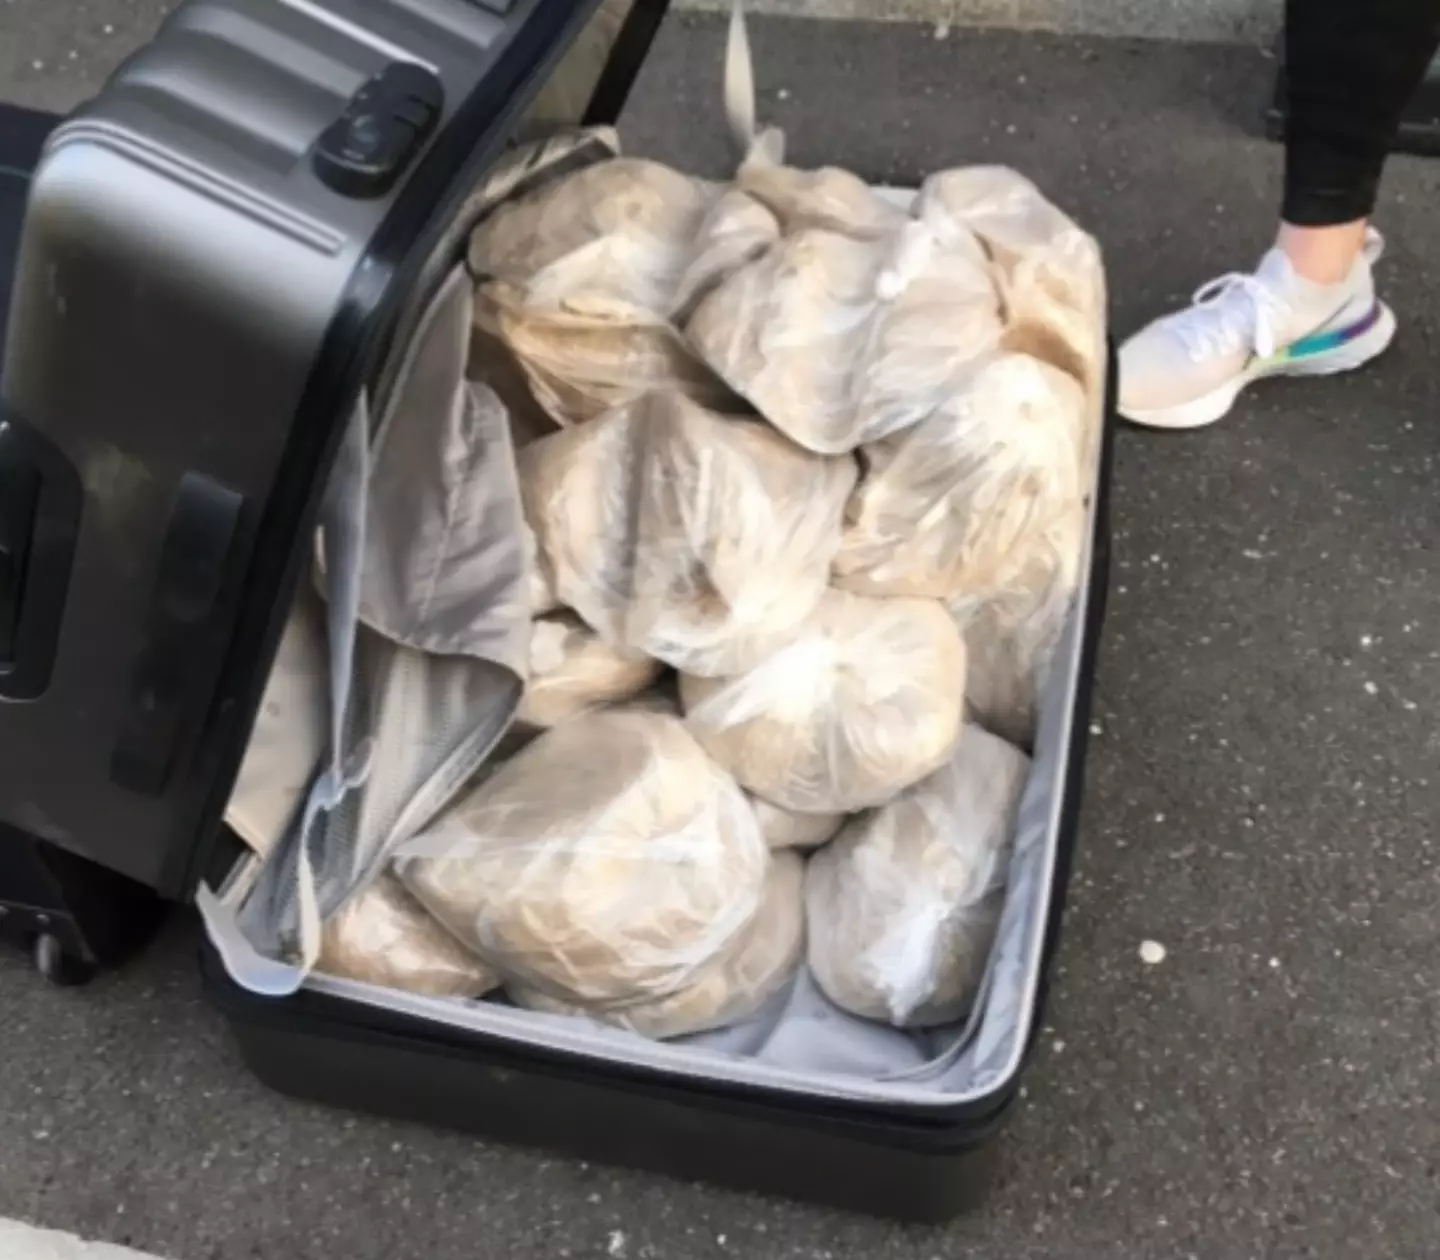 Police seized at least 100kgs of Class A drugs from Liverpool dealers.